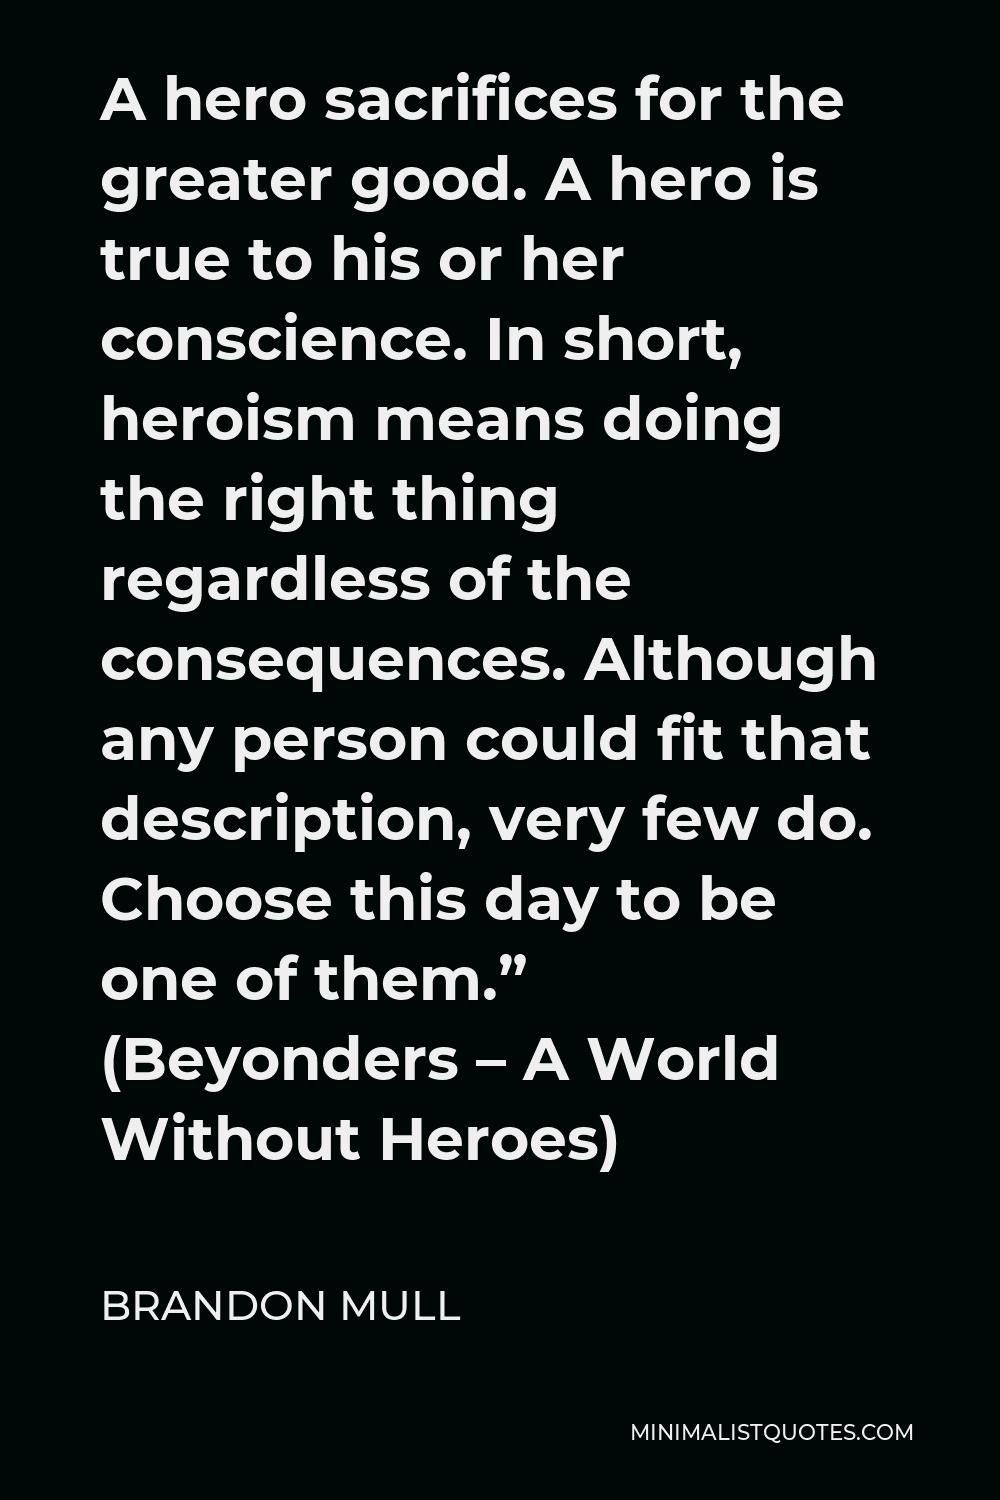 Brandon Mull Quote - A hero sacrifices for the greater good. A hero is true to his or her conscience. In short, heroism means doing the right thing regardless of the consequences. Although any person could fit that description, very few do. Choose this day to be one of them.” (Beyonders – A World Without Heroes)